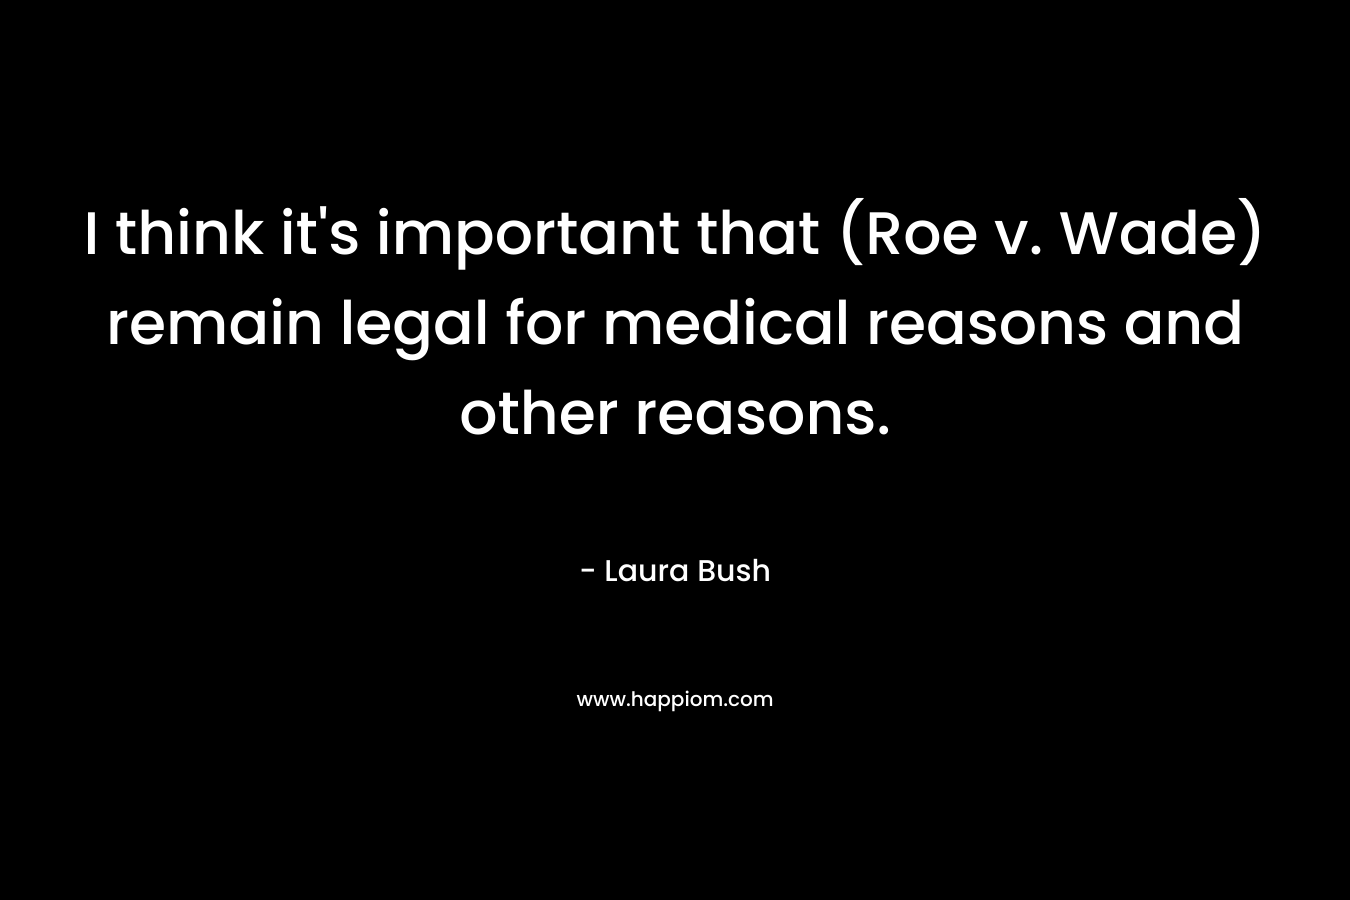 I think it’s important that (Roe v. Wade) remain legal for medical reasons and other reasons. – Laura Bush